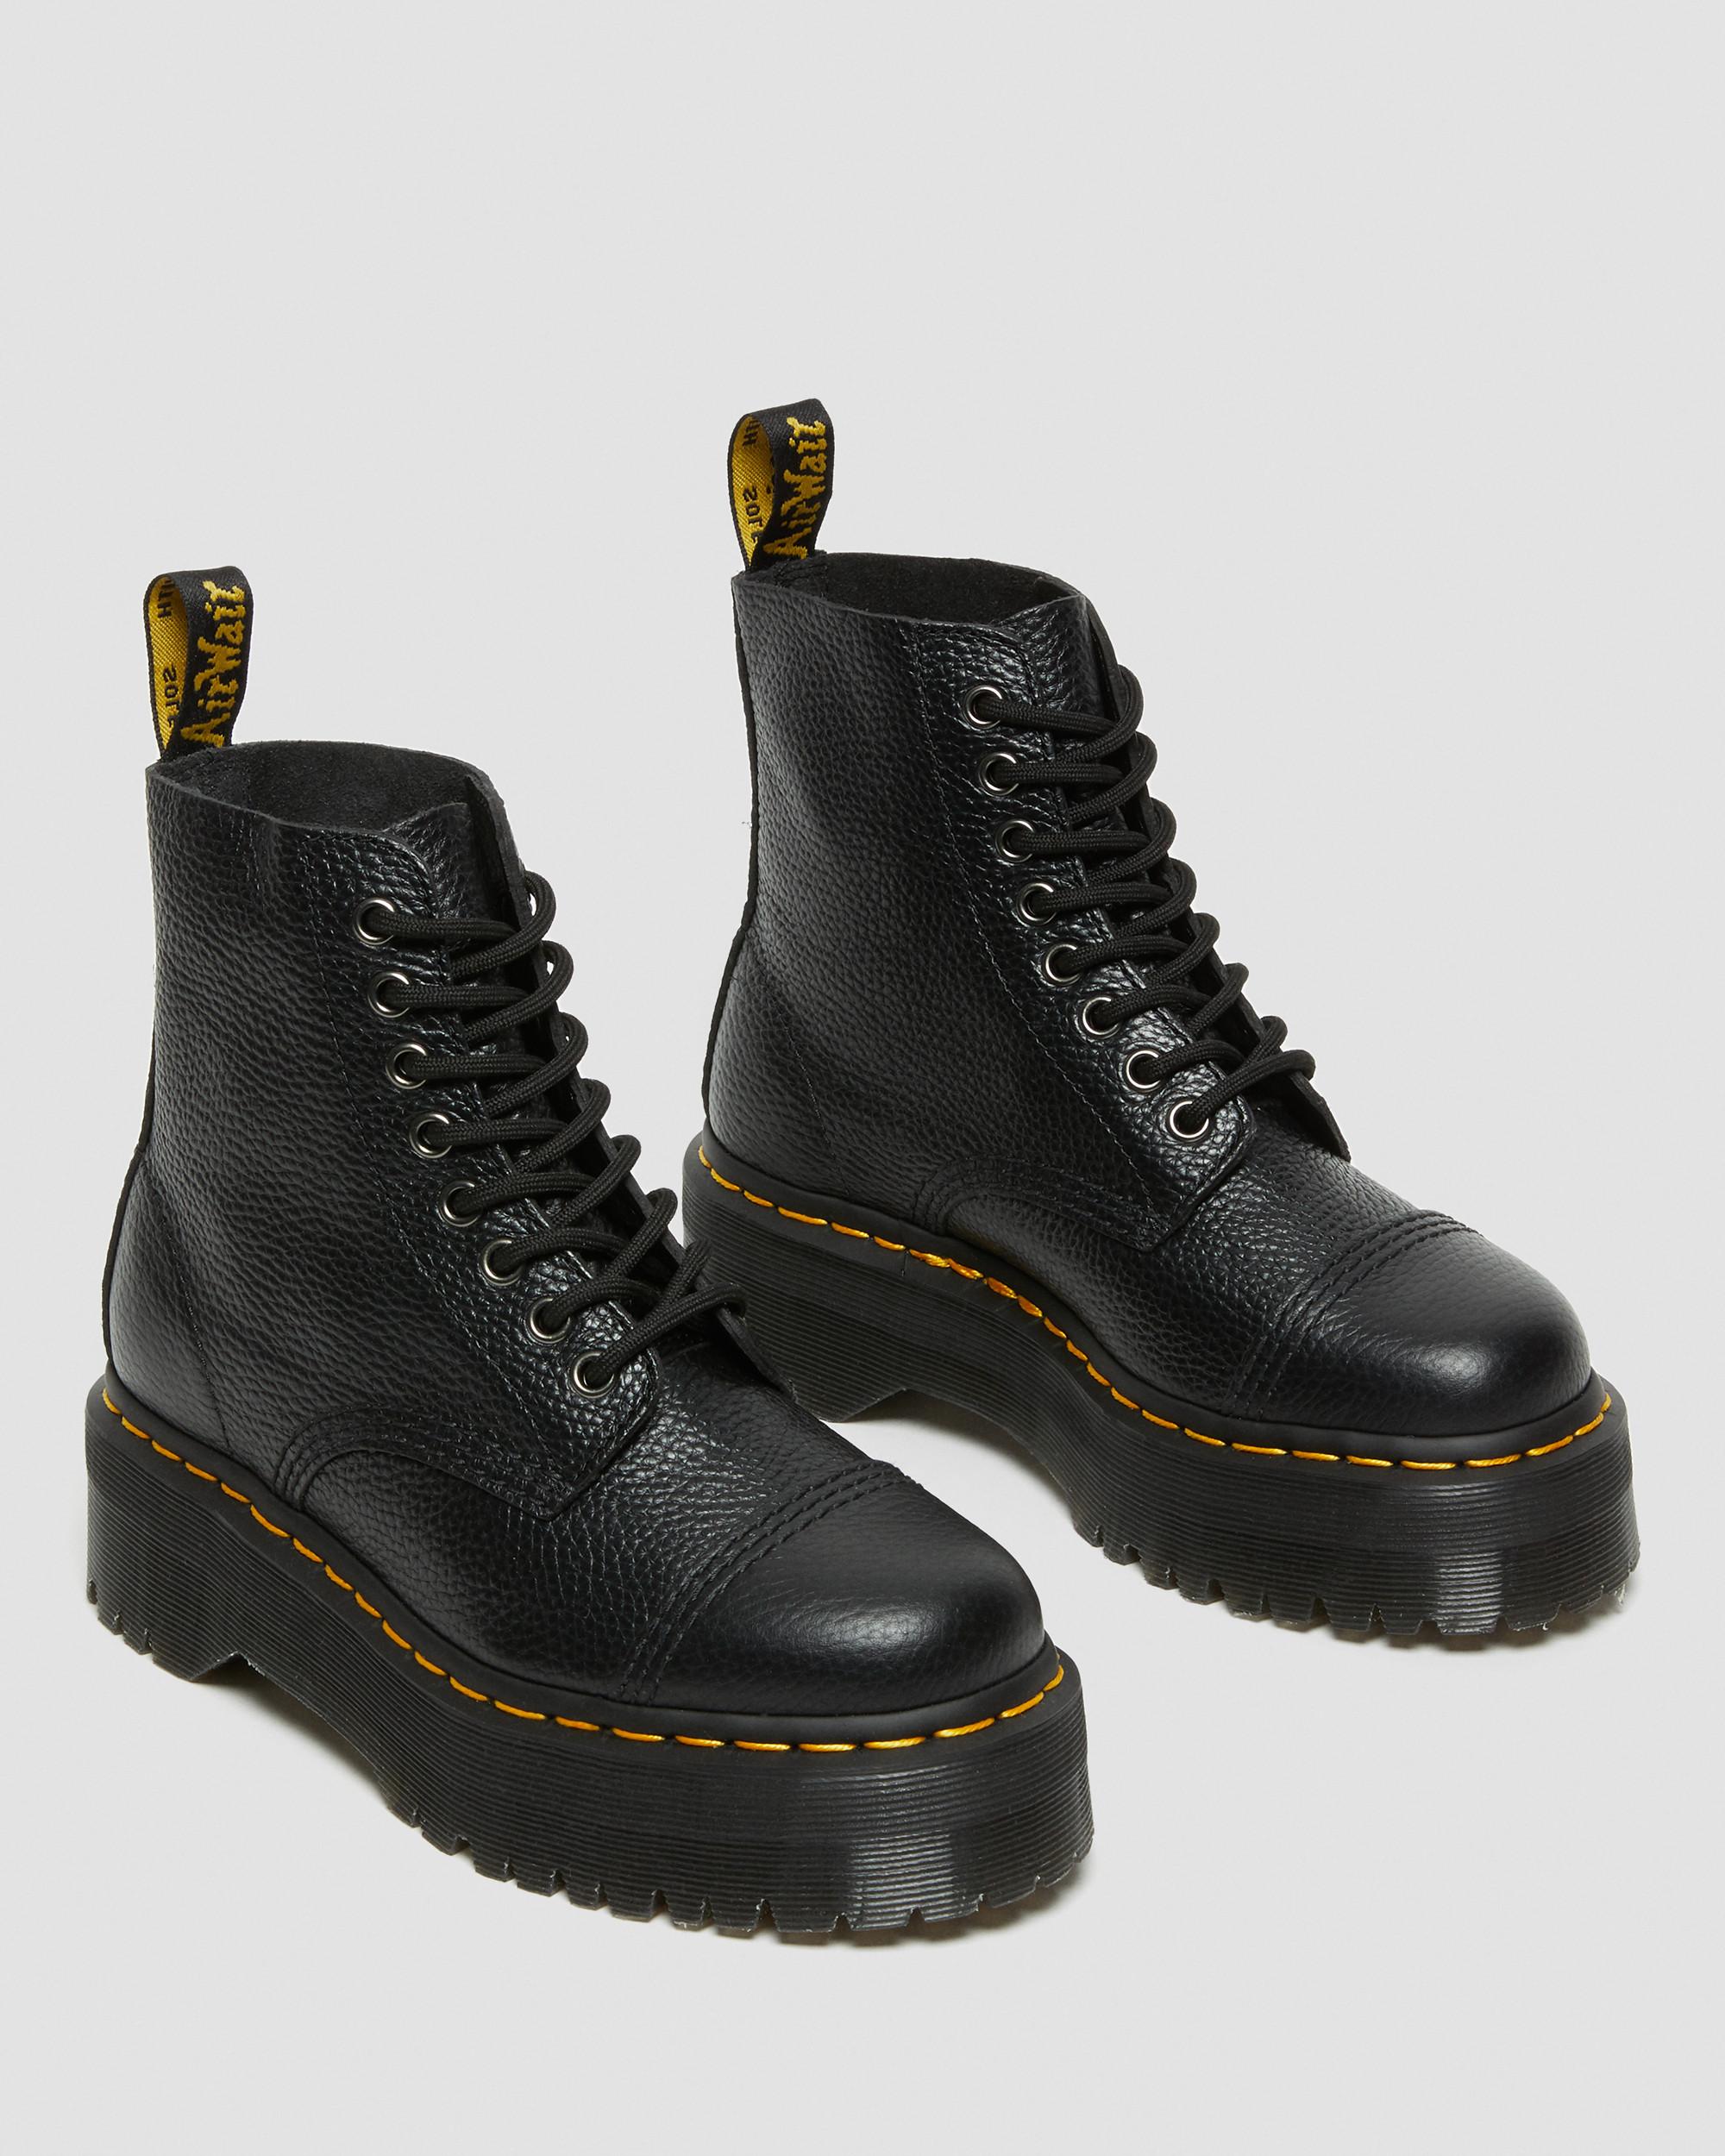 Sinclair Milled Nappa Leather Platform Boots in Black